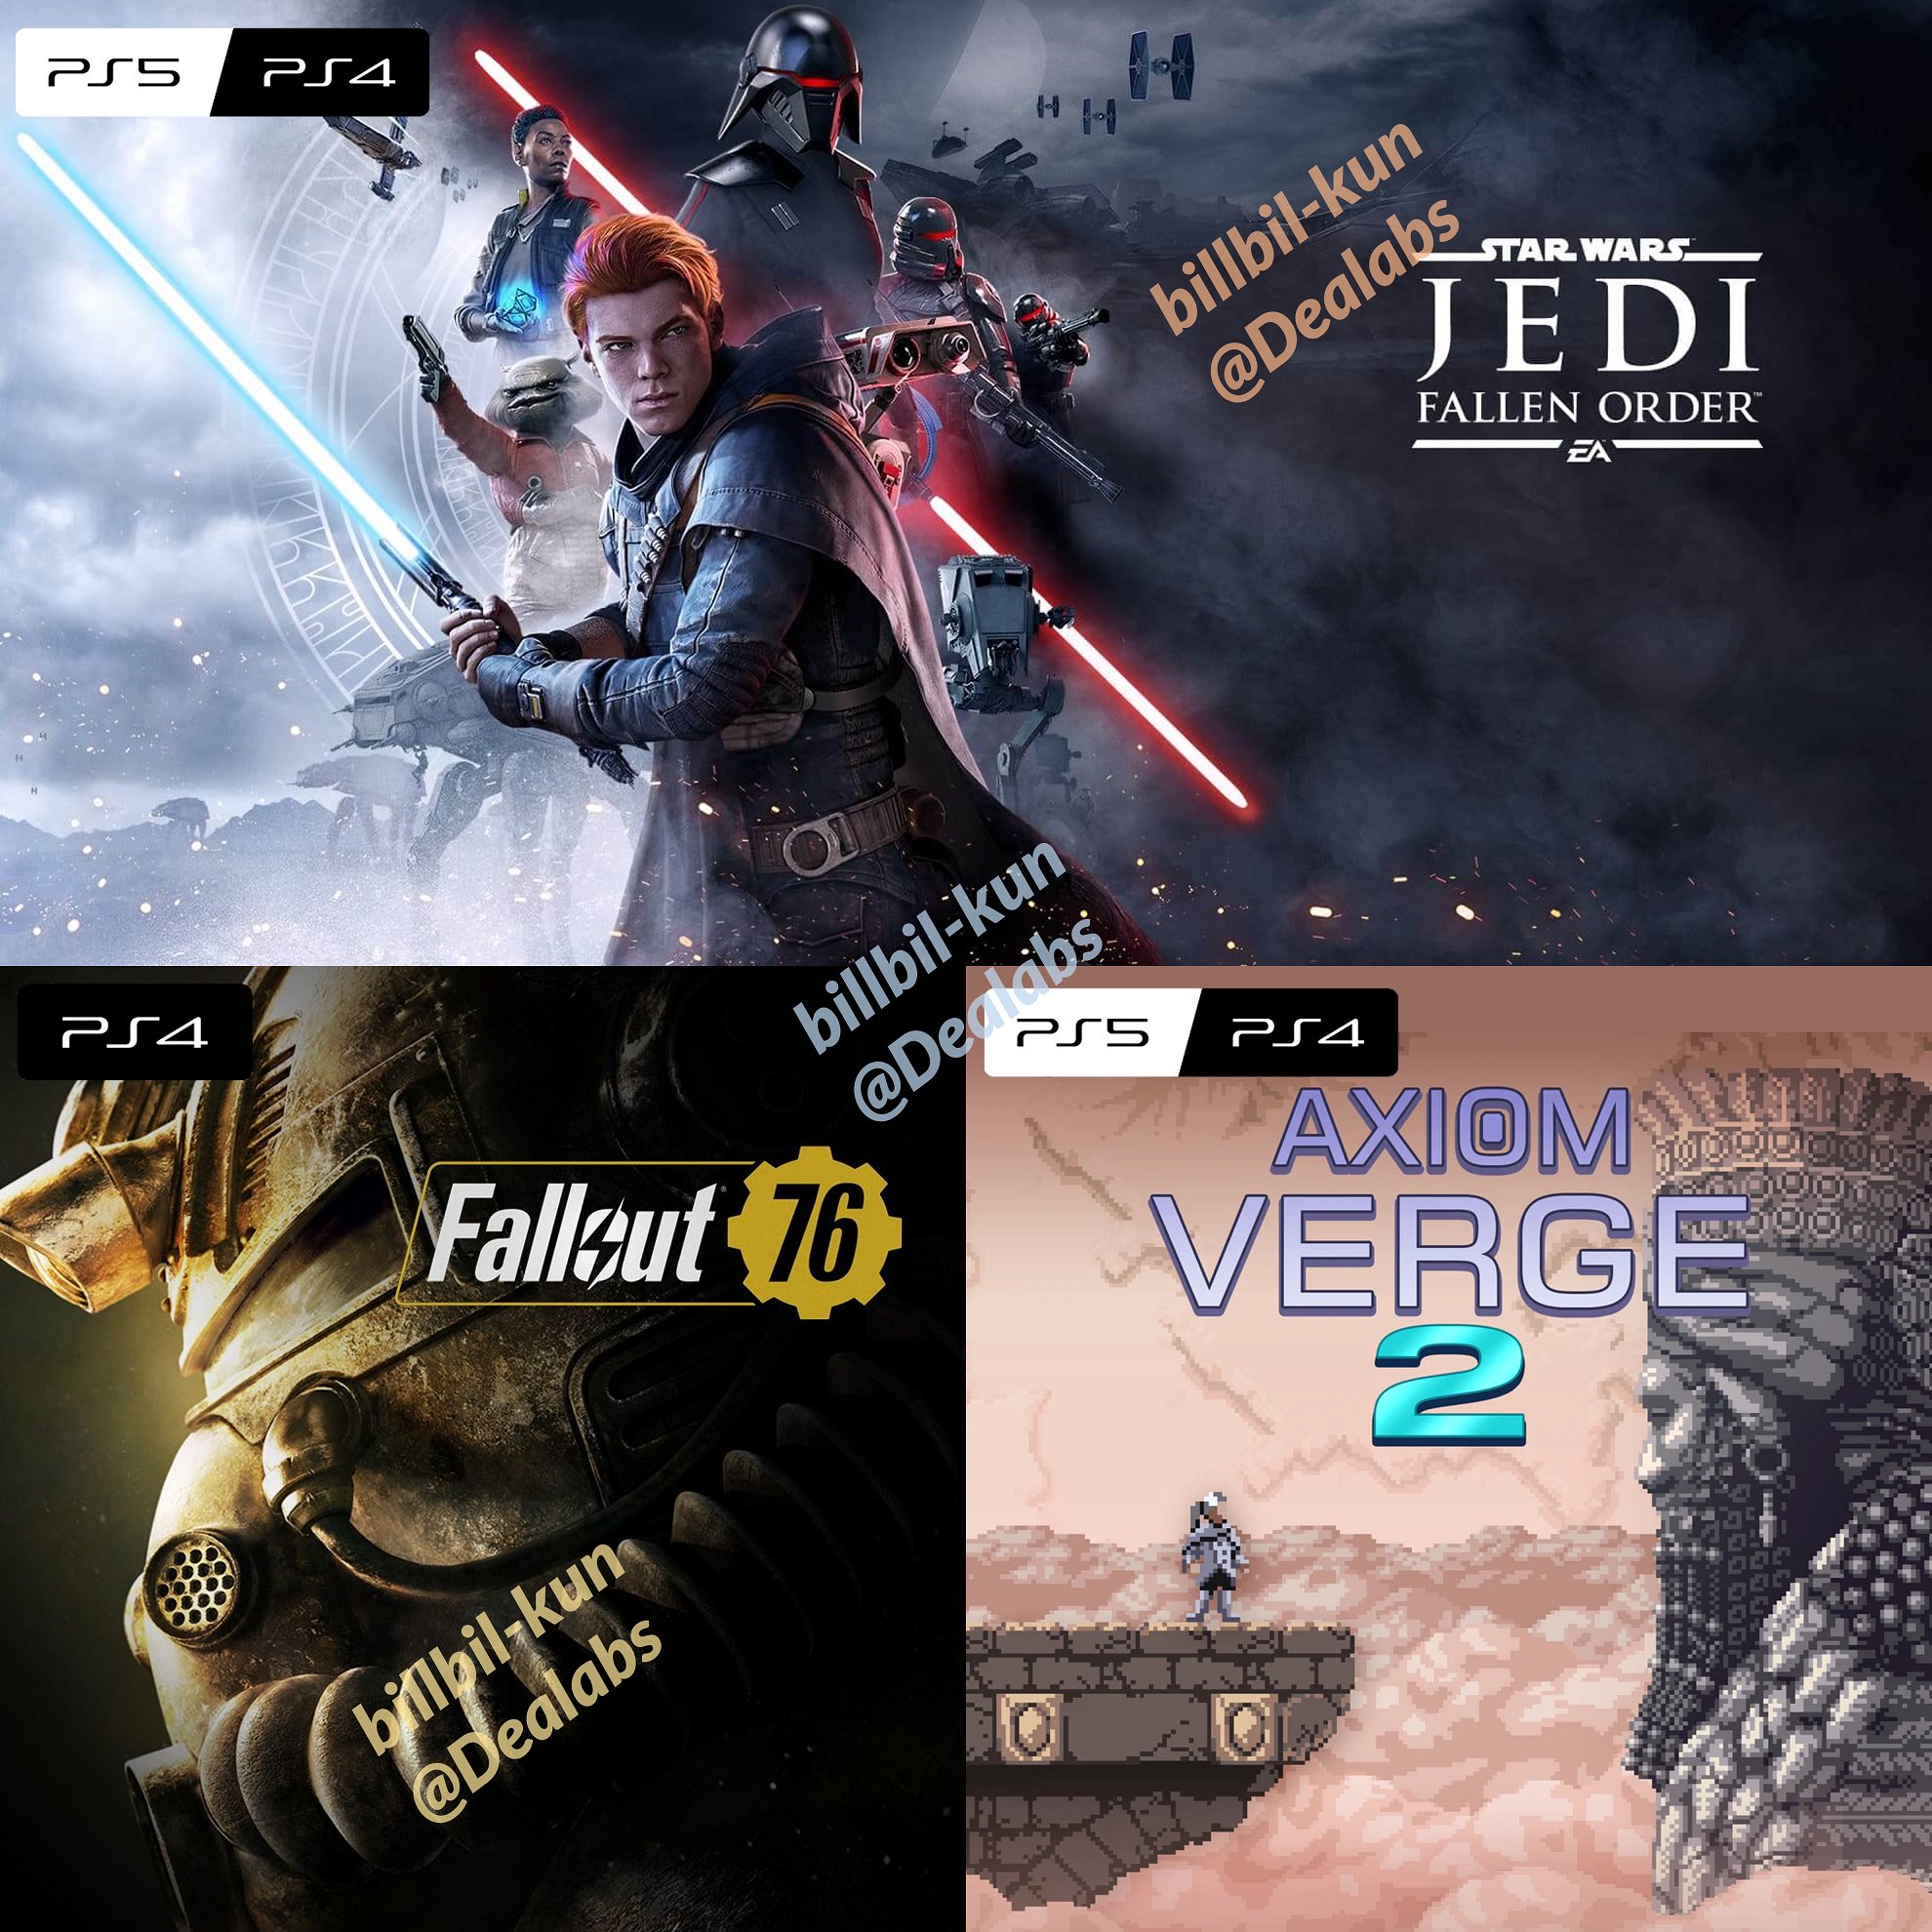 Okami Games on Twitter: Leaked PlayStation Plus games for January 2023. •  Star Wars Jedi Fallen Order (PS5